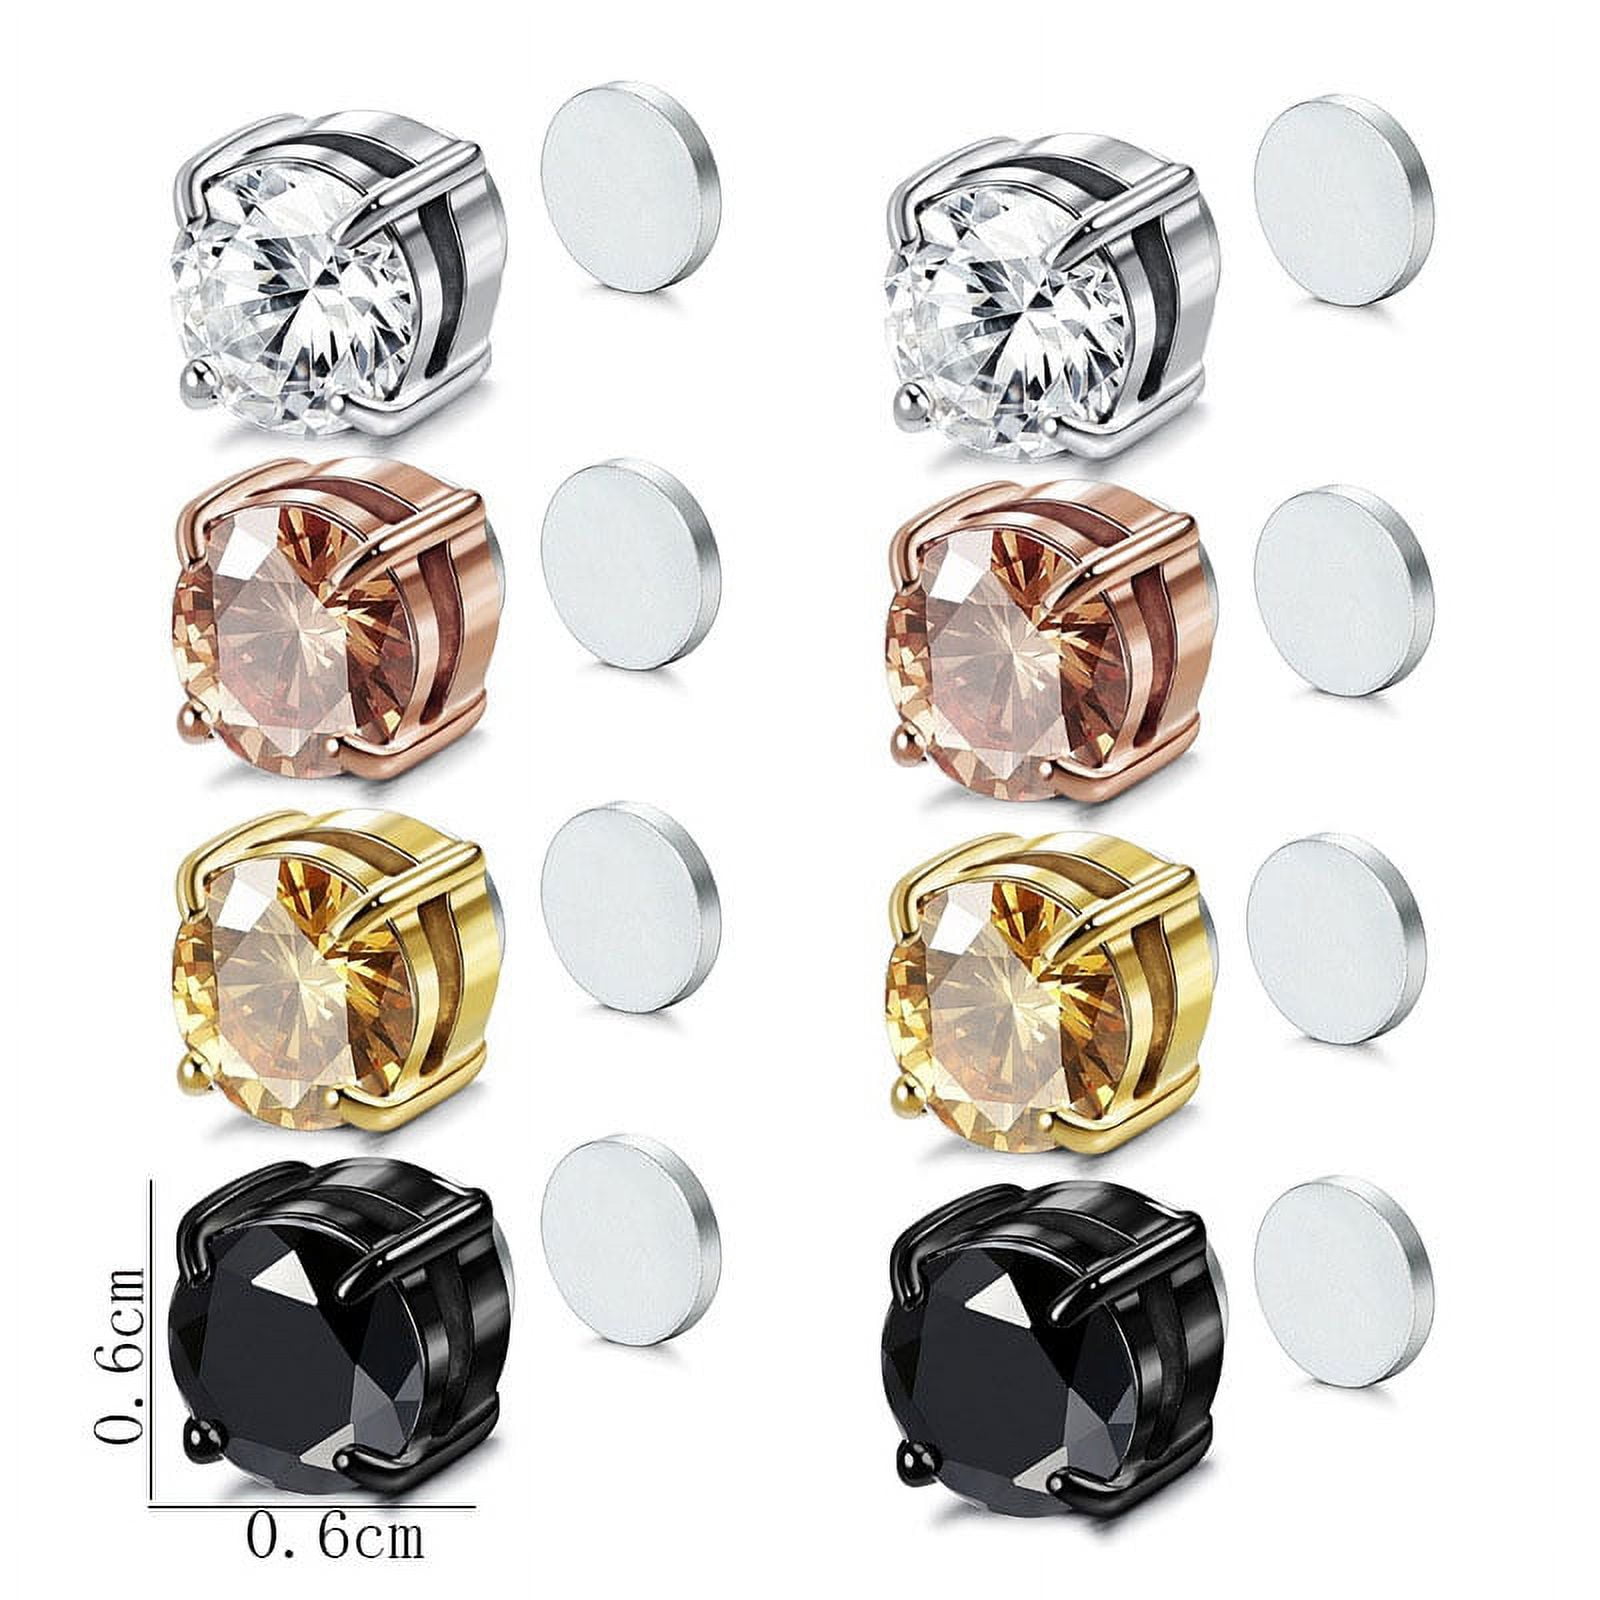 Amazon.com: VEXXS S925 Diamond Stud Earrings for Men, 14K Real Gold Plated  Iced Out Earrings 5A CZ Stones 925 Sterling Silver Studs for Men Women  Hypoallergenic Earrings: Clothing, Shoes & Jewelry